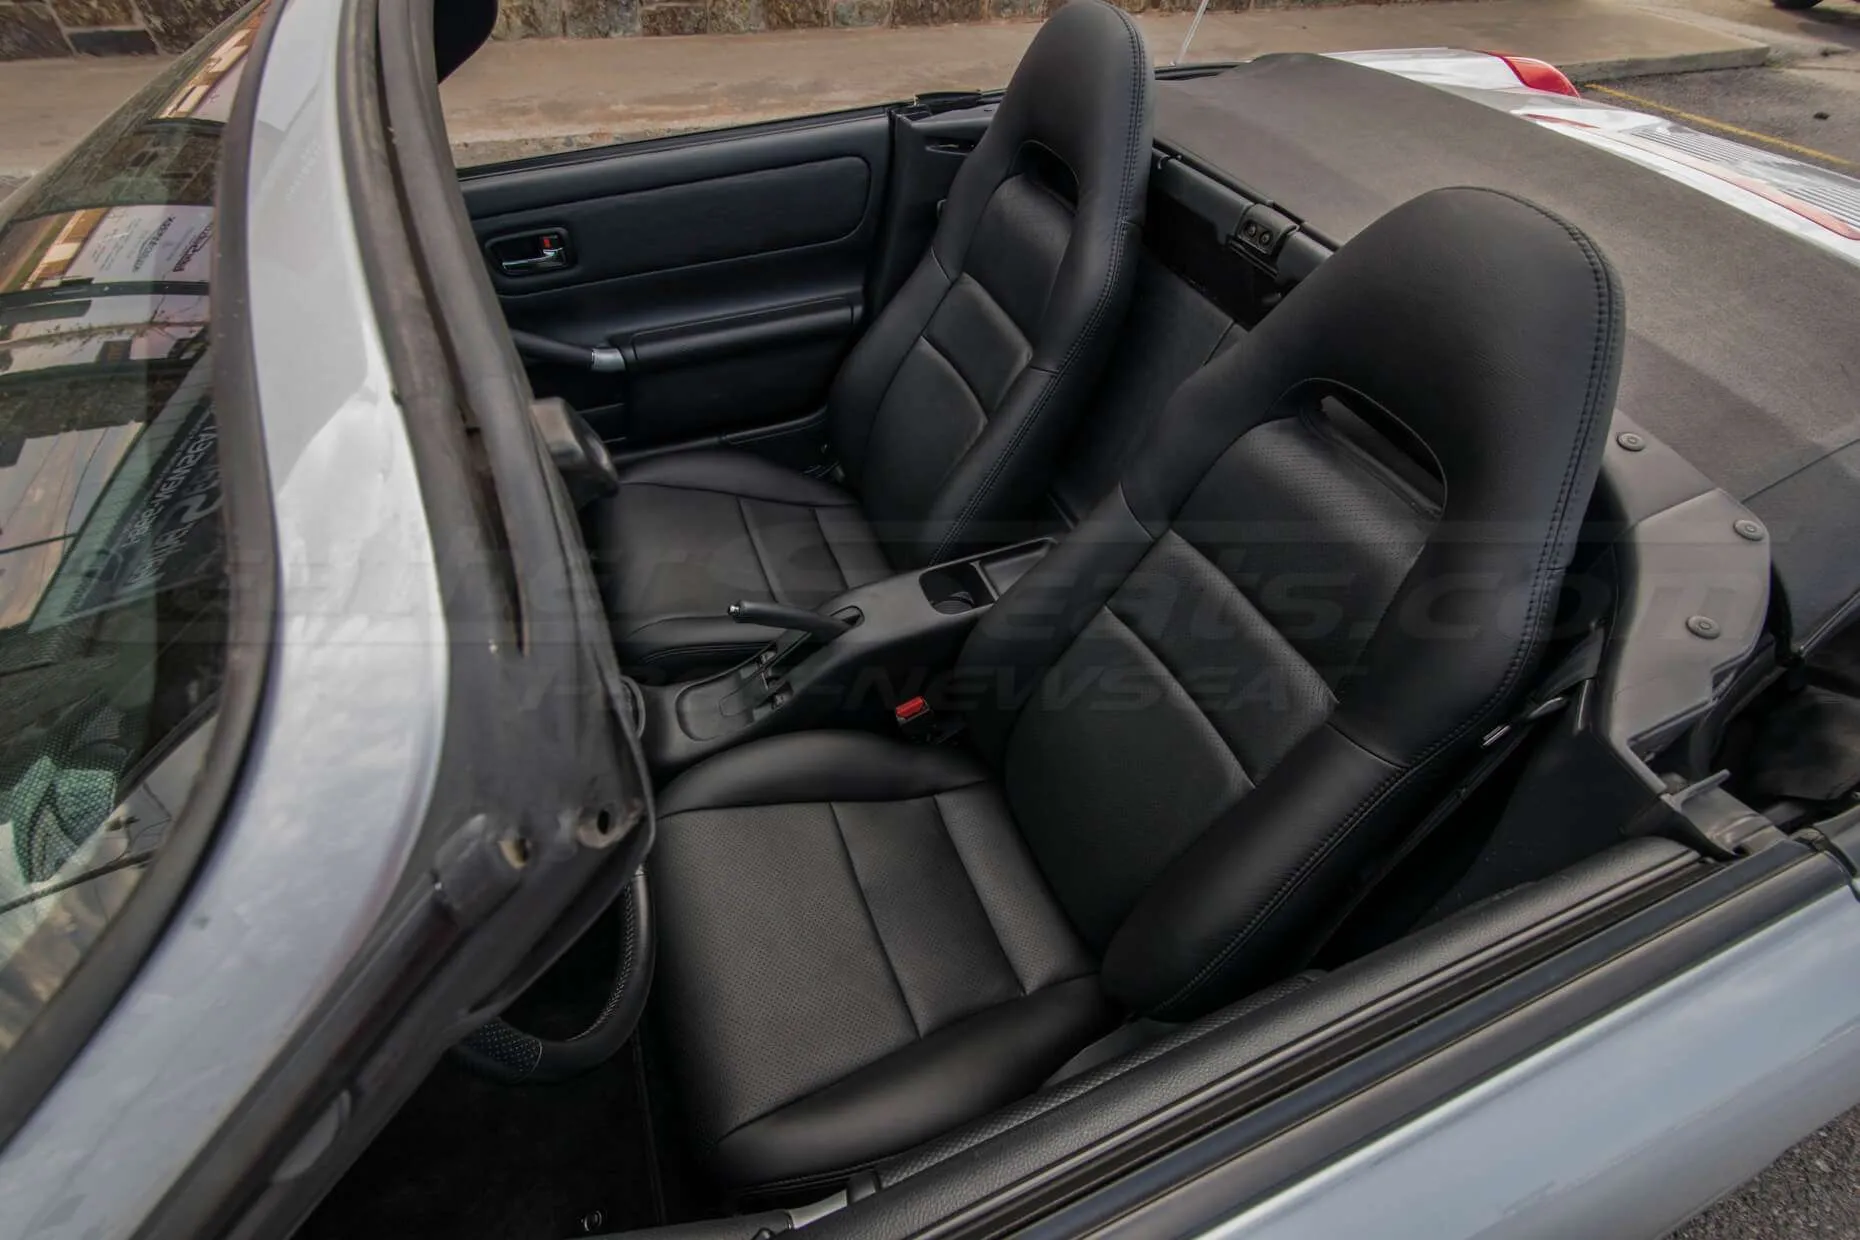 Toyota MR2 leather upholstery - black